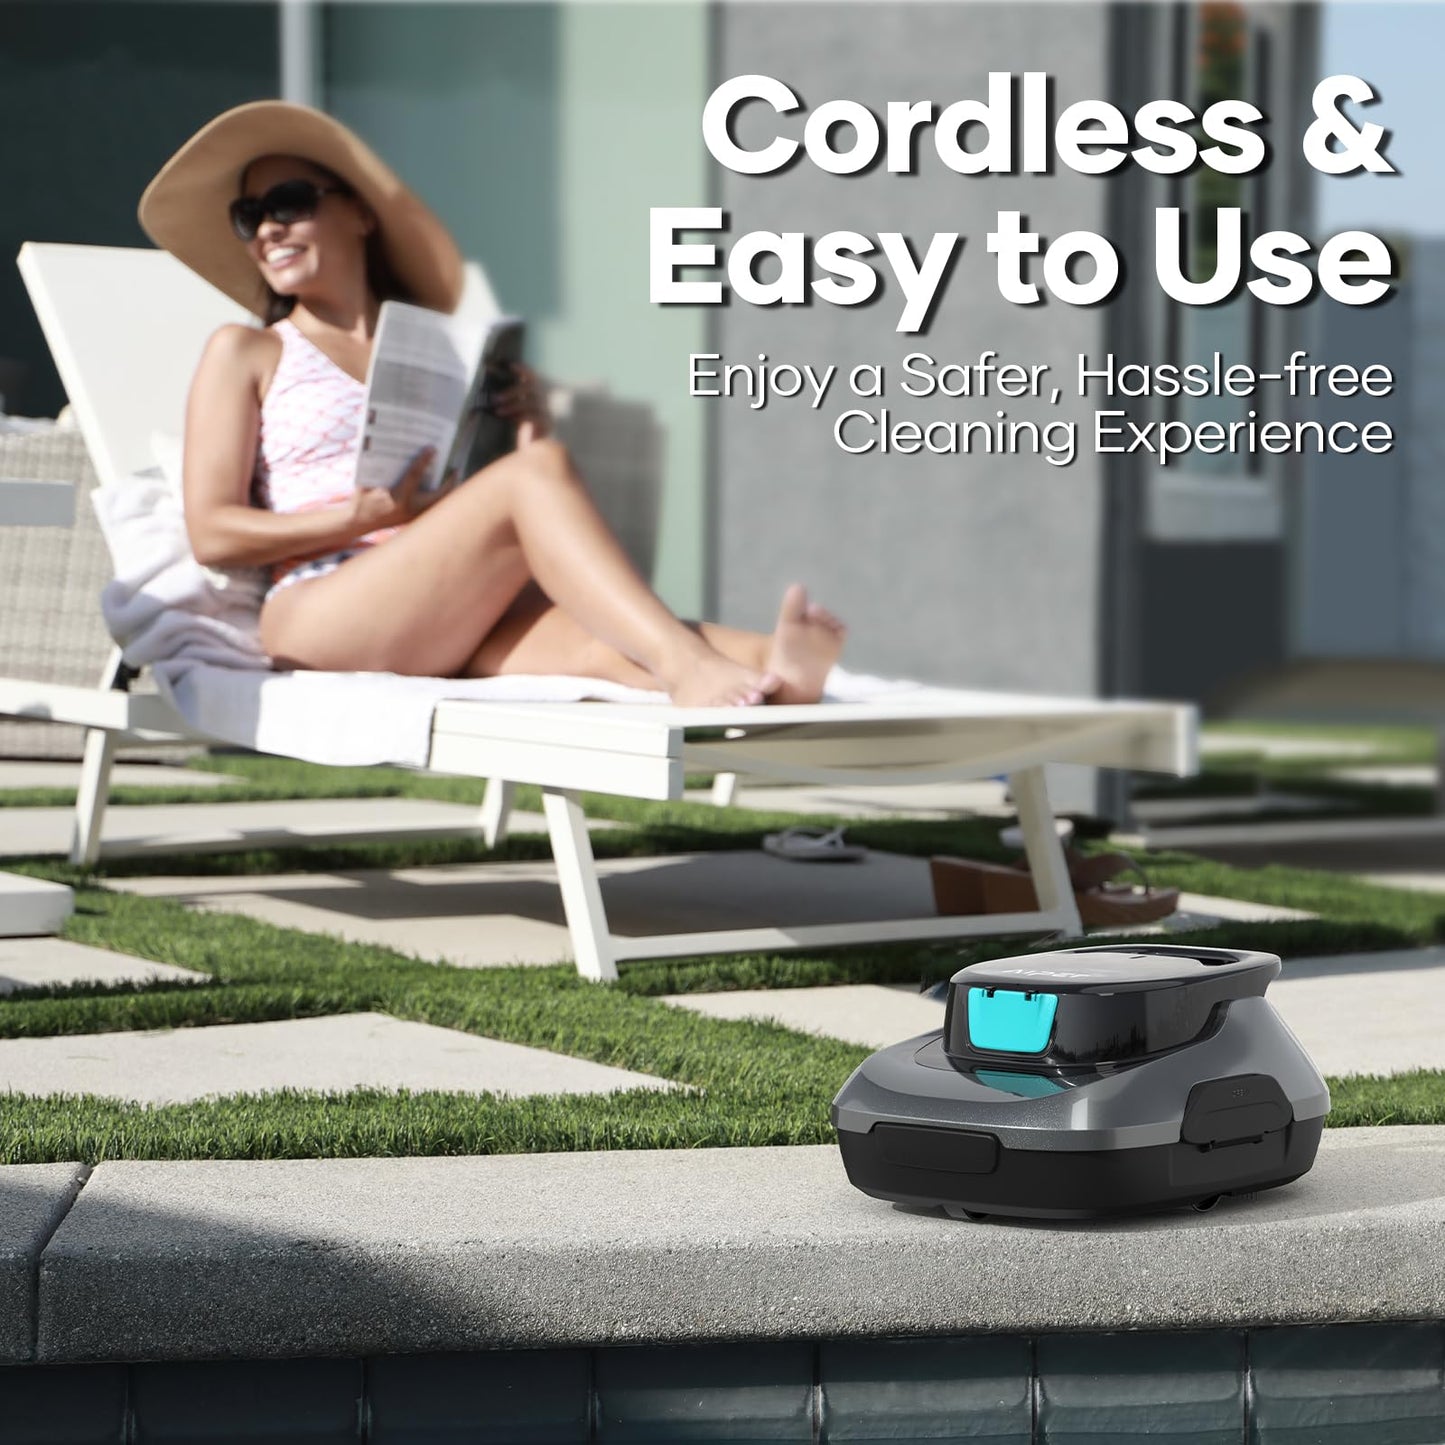 AIPER Scuba SE Robotic Pool Cleaner, Cordless Robotic Pool Vacuum, Lasts up to 90 Mins, Ideal for Above Ground Pools, Automatic Cleaning with Self-Parking Capabilities-Gray